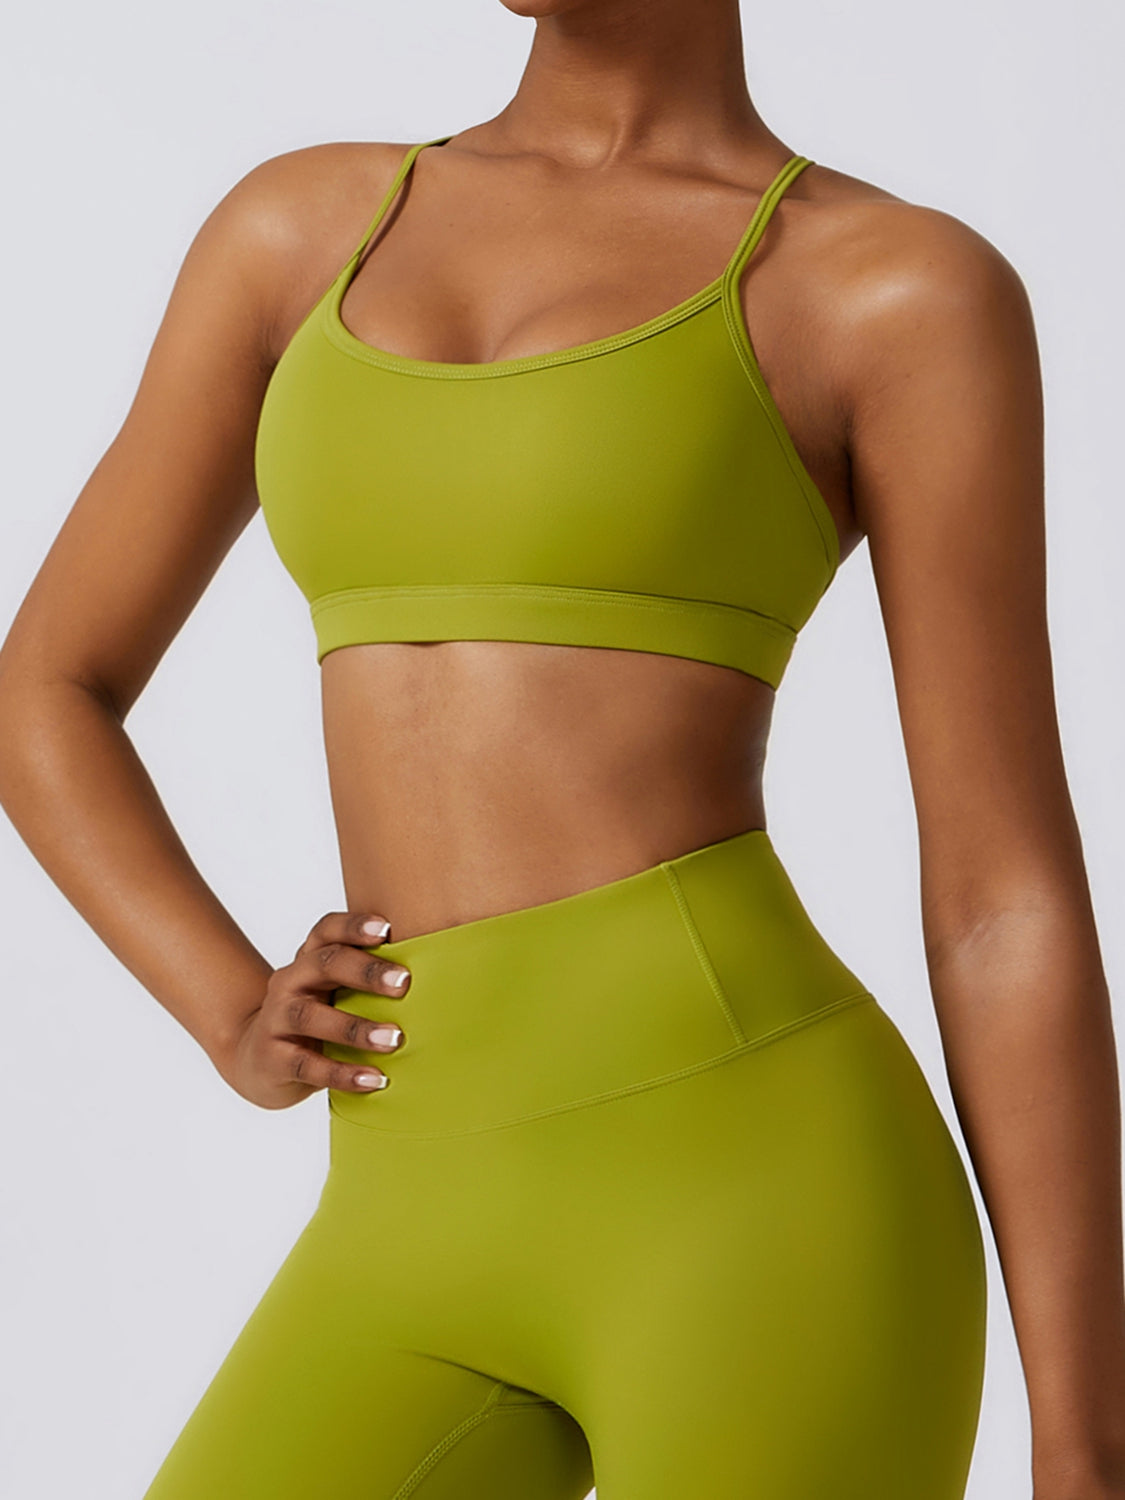 Cropped Sports Tank Top Additional Options Available